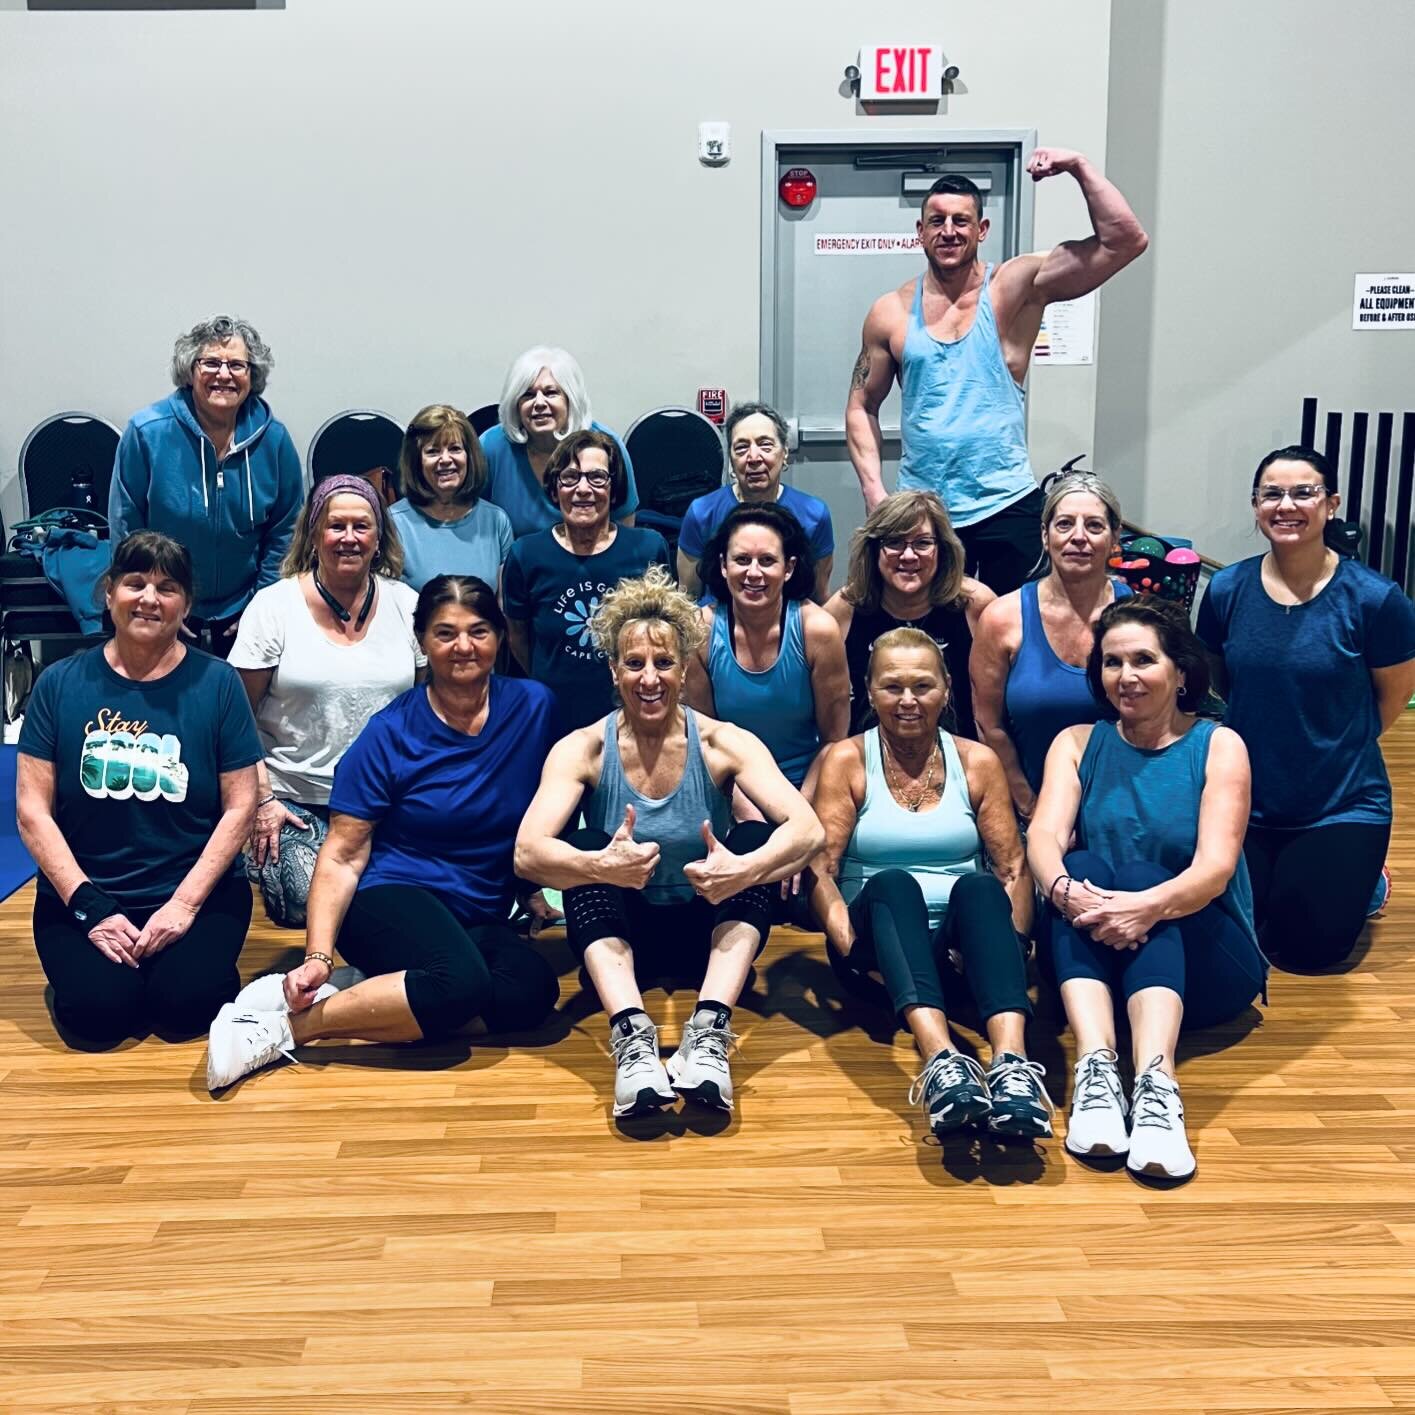 March is National Colorectal Cancer Awareness Month. Thank you to Instructor Lisa and our members for helping spread the word that colorectal cancer screening saves lives. #surgefitnesscenter #northhaven